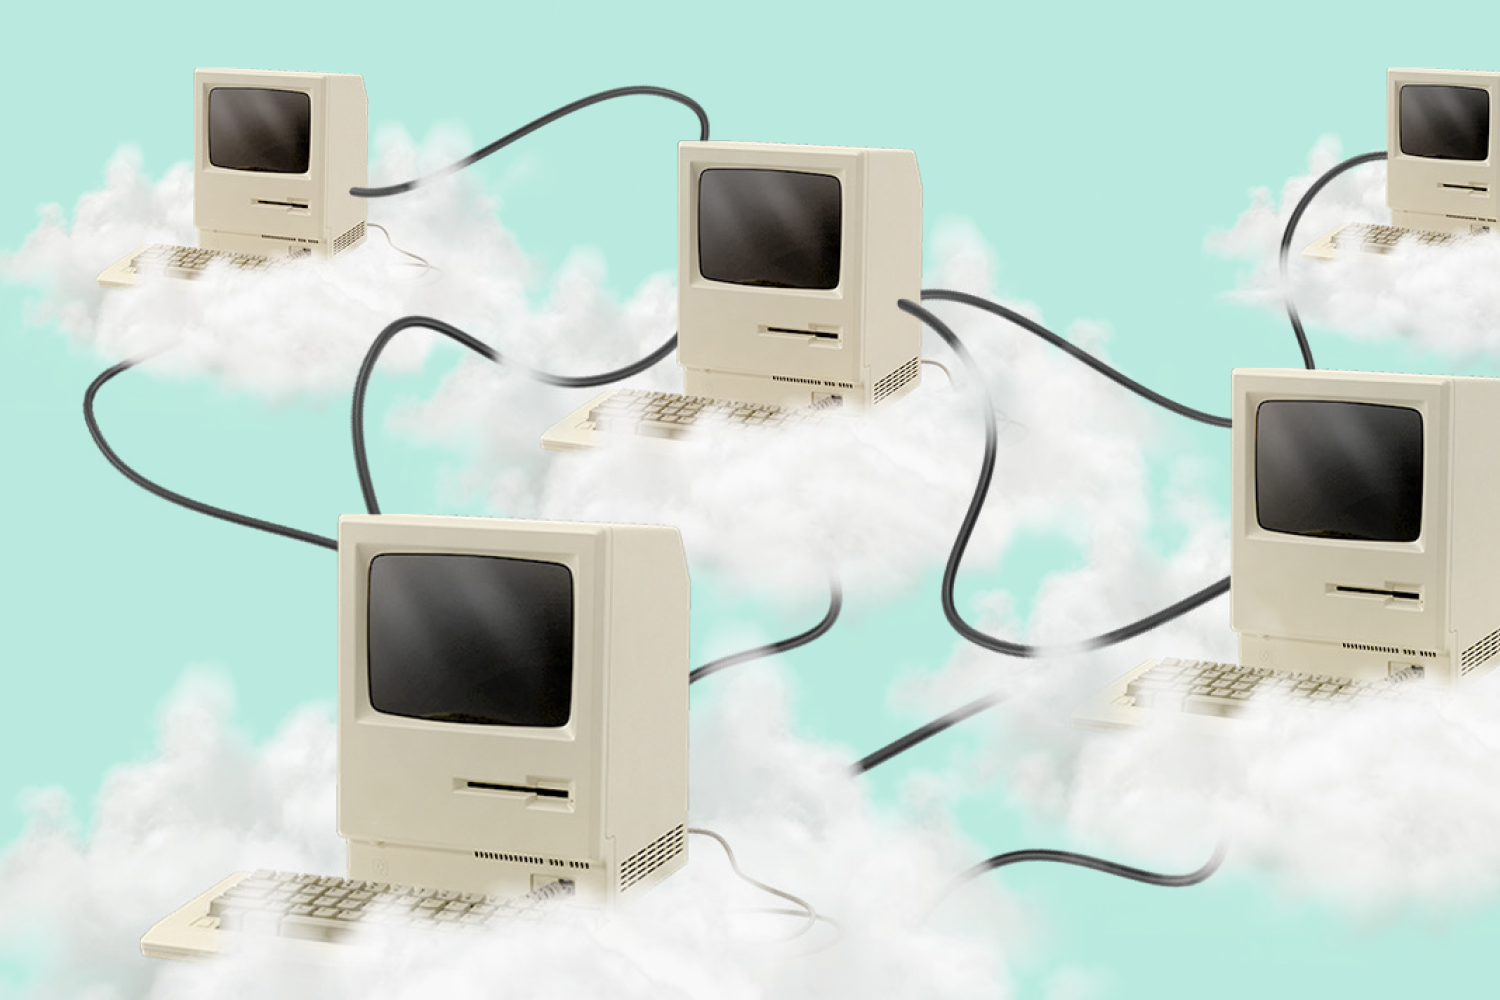 Connected computers sitting on clouds